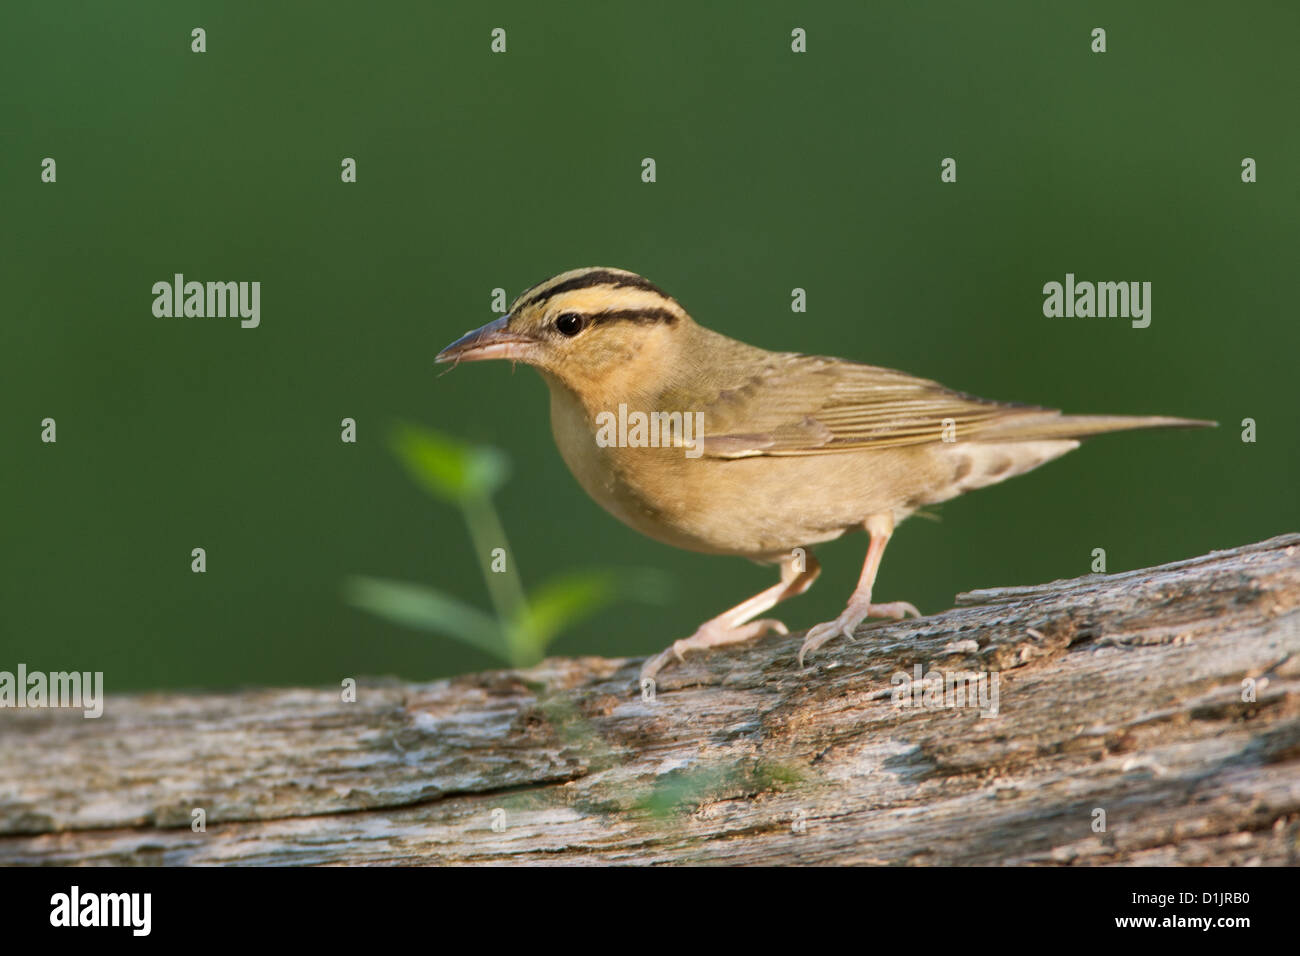 Verme-eating Warbler uccelli songbird songbirds Ornitologia Scienza natura natura natura ambiente Warblers Foto Stock